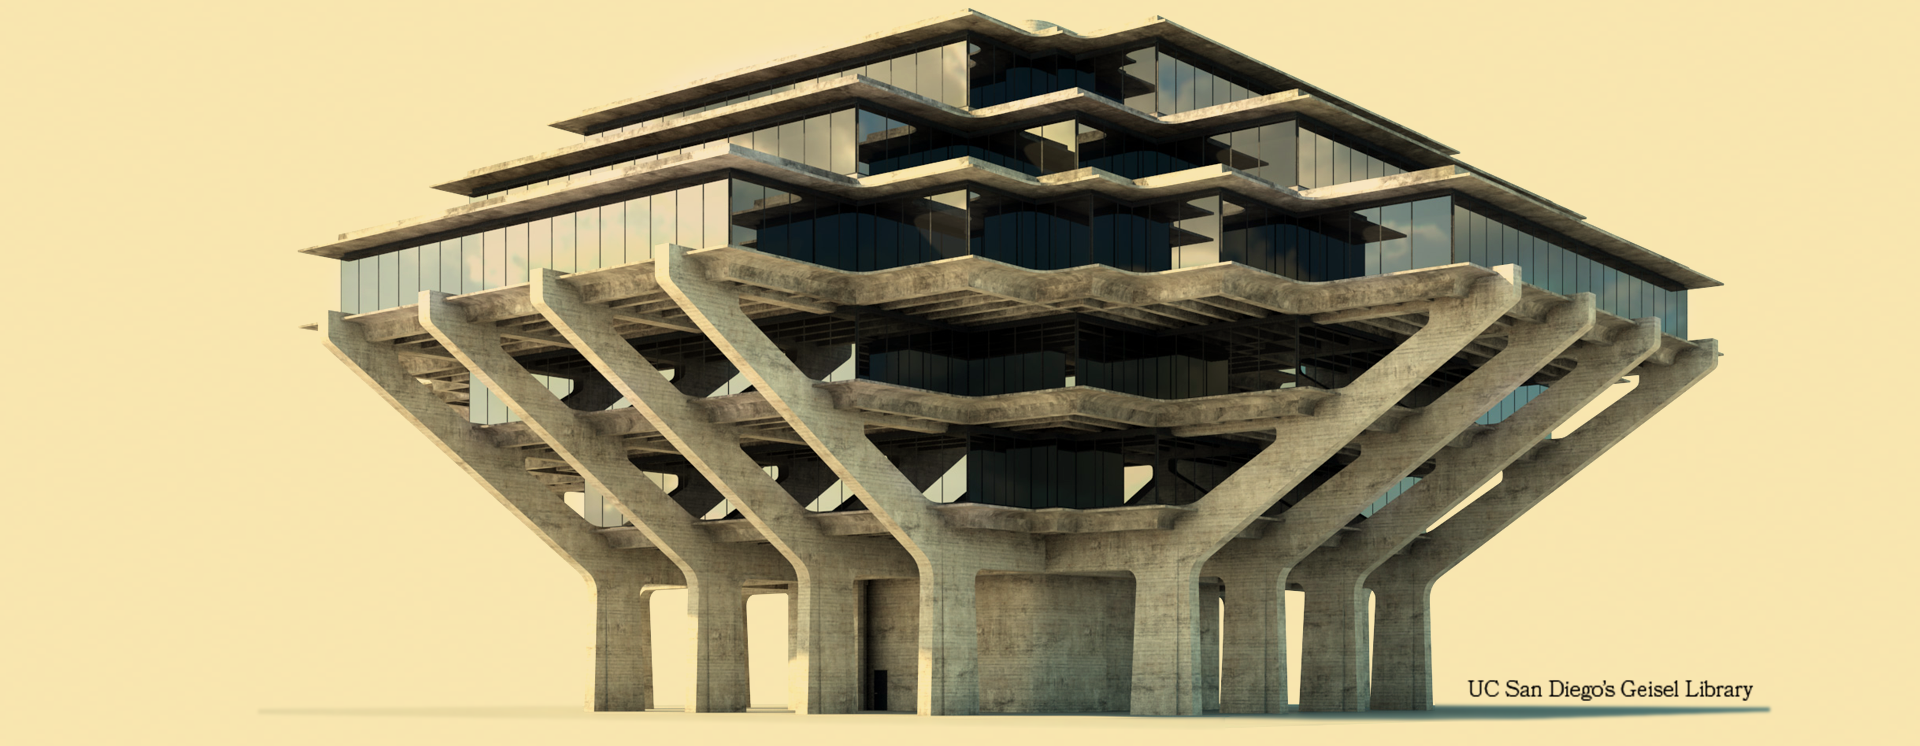 Geisel Library at UC San Diego, named in honor of Ted and Audrey.